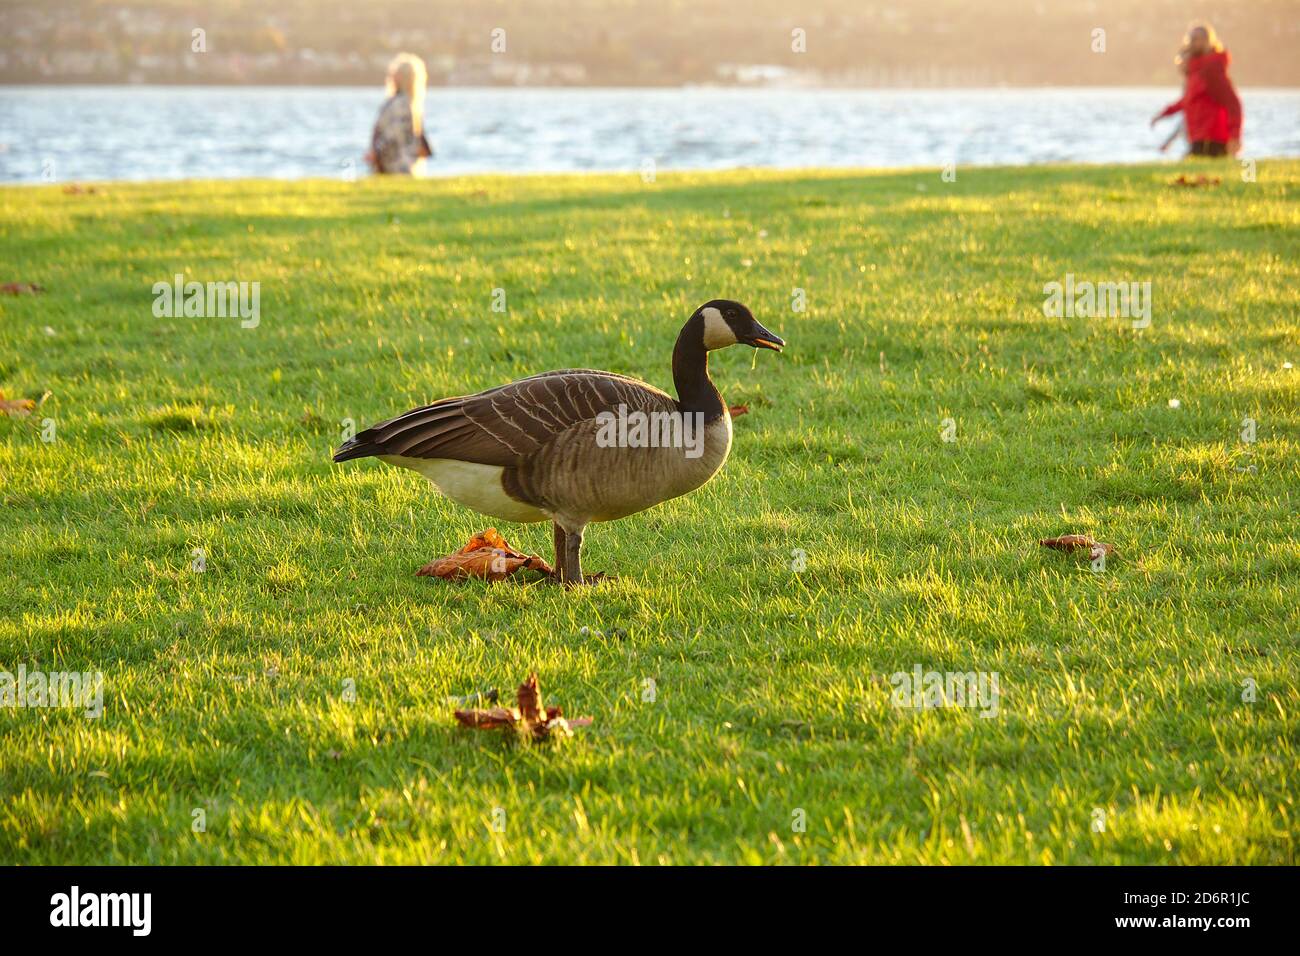 Canada Goose (Branta canadensis)  walking in the grass, Stanley Park, British Columbia, Canada Stock Photo